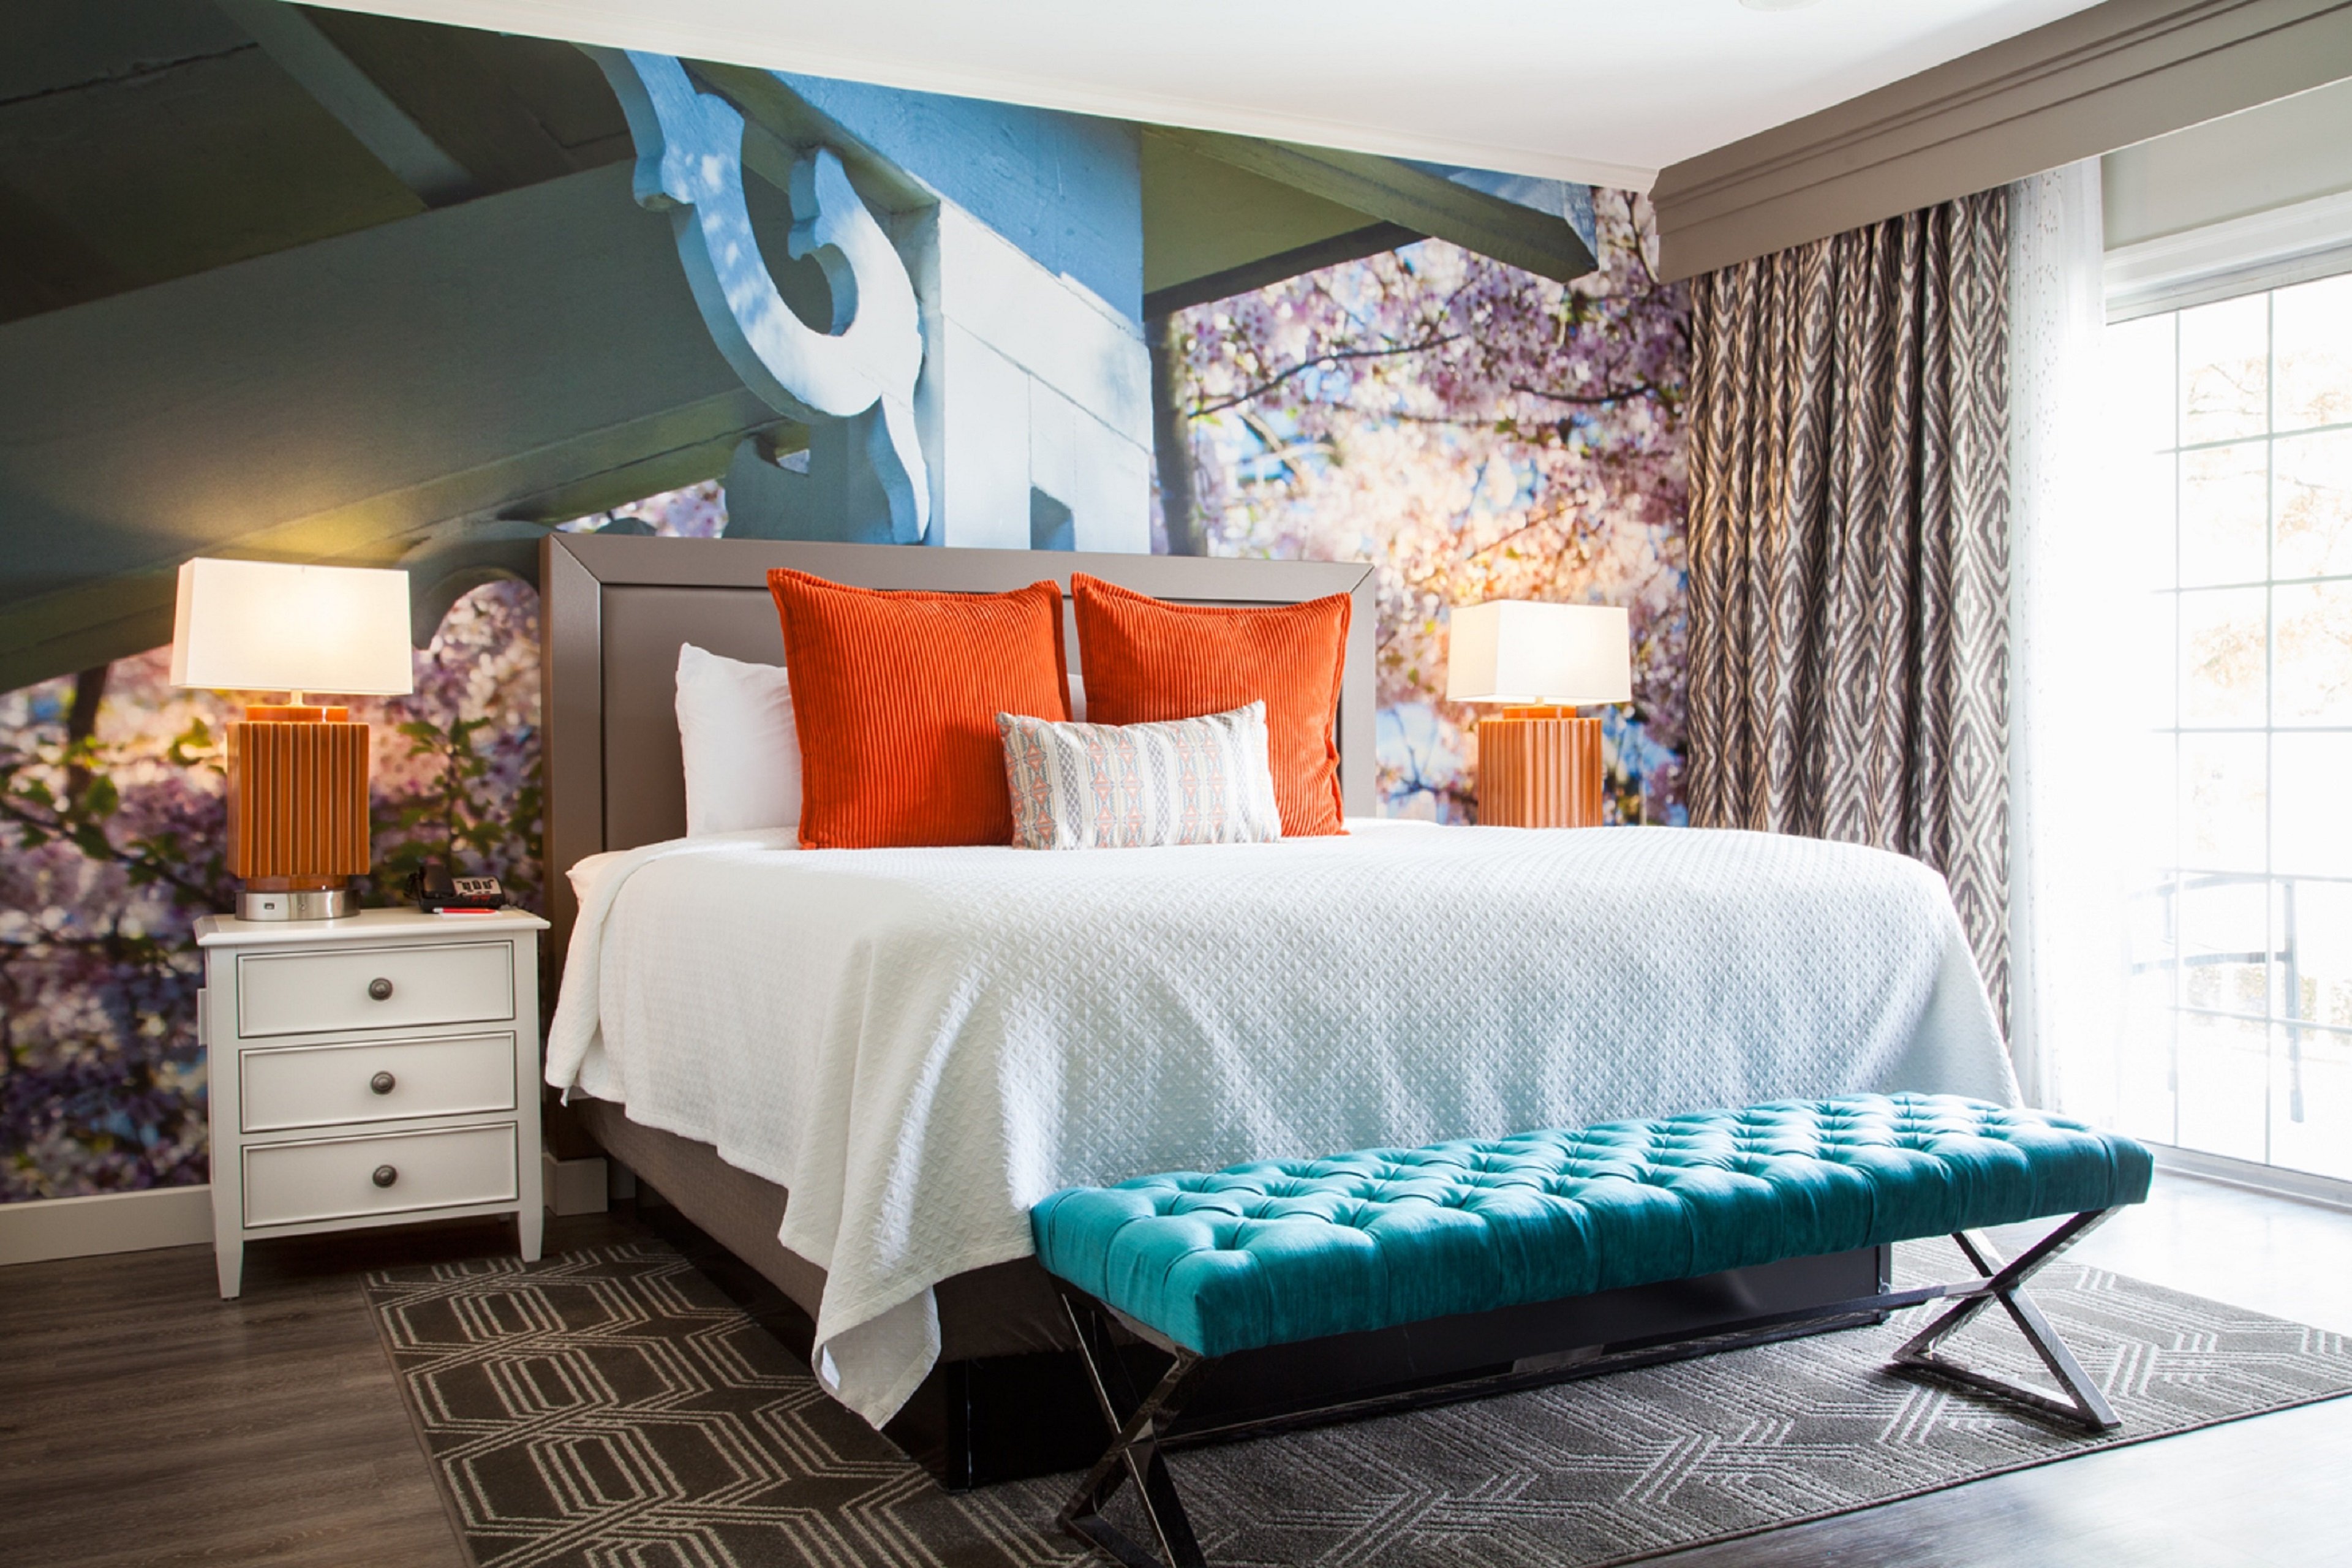 Our King Bed Suite has everything you need for a great night.